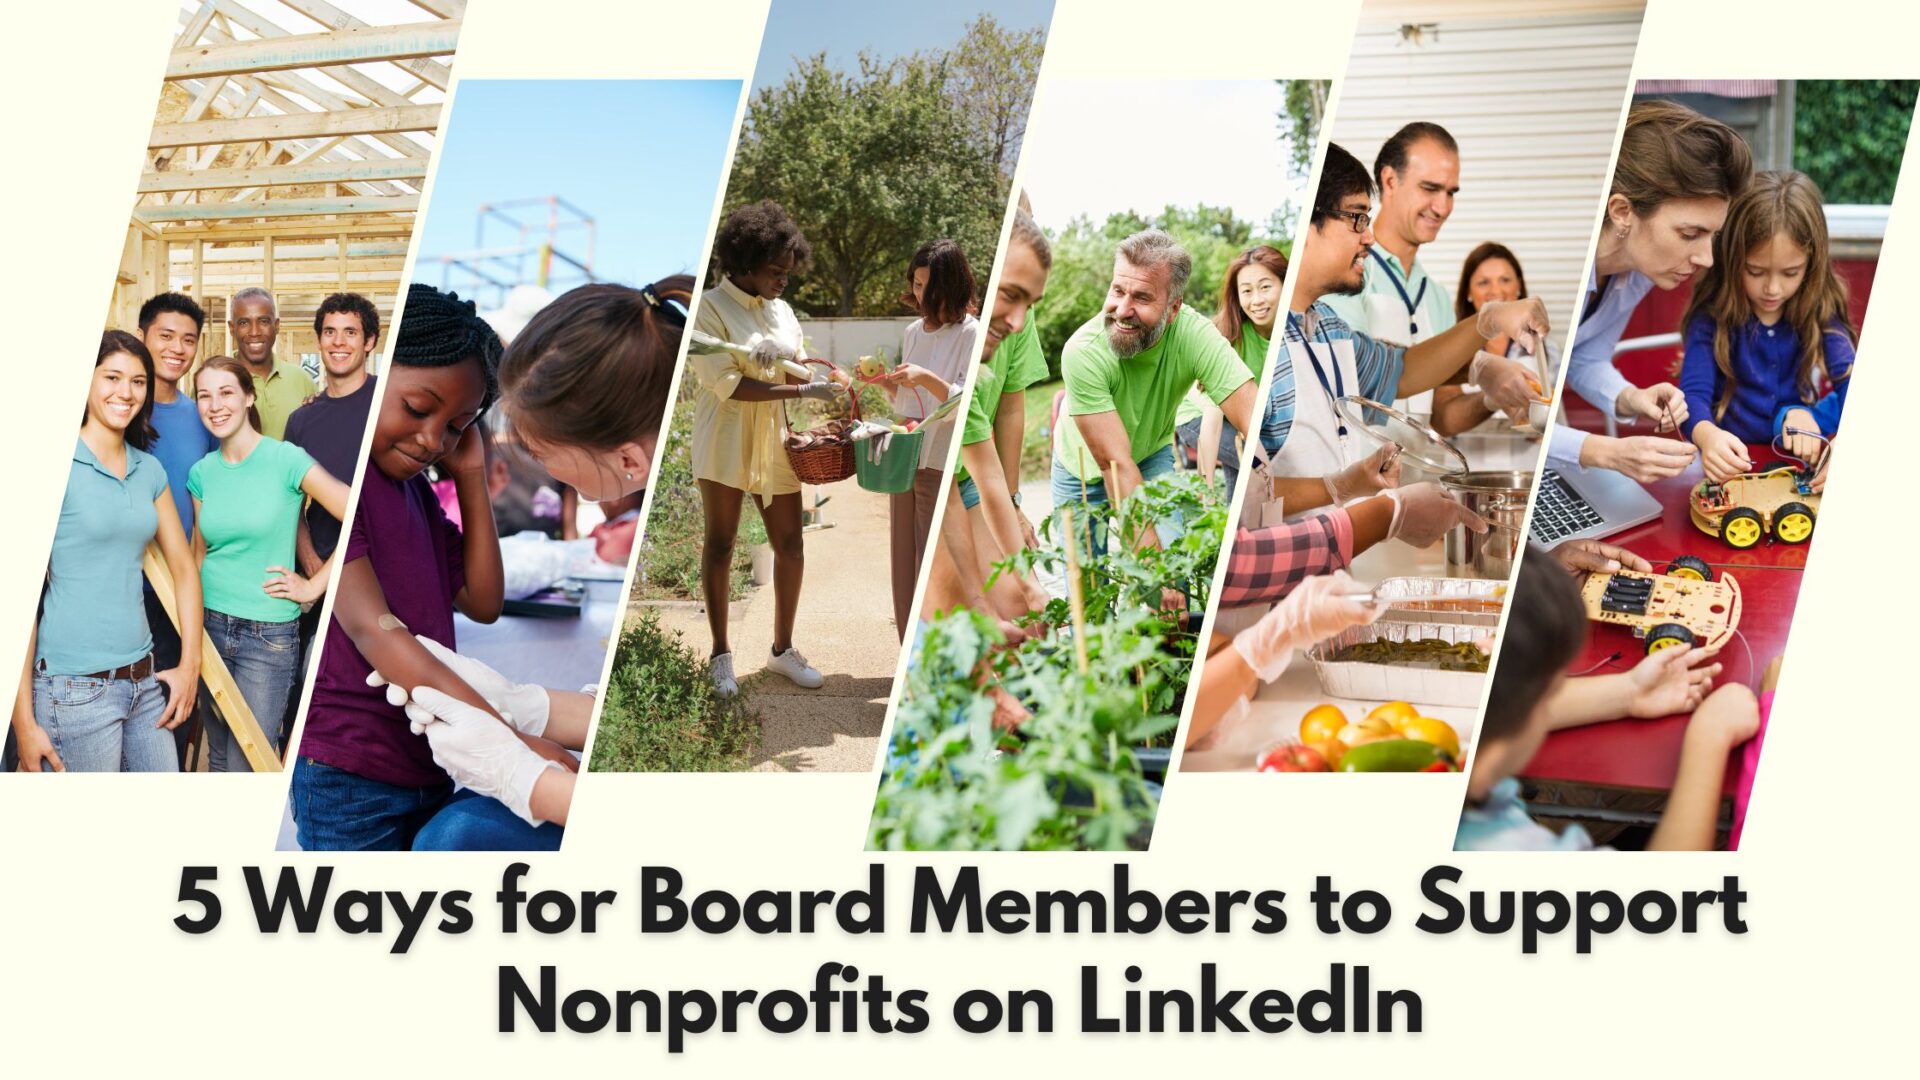 5 Ways for Board Members to Support Nonprofits on LinkedIn